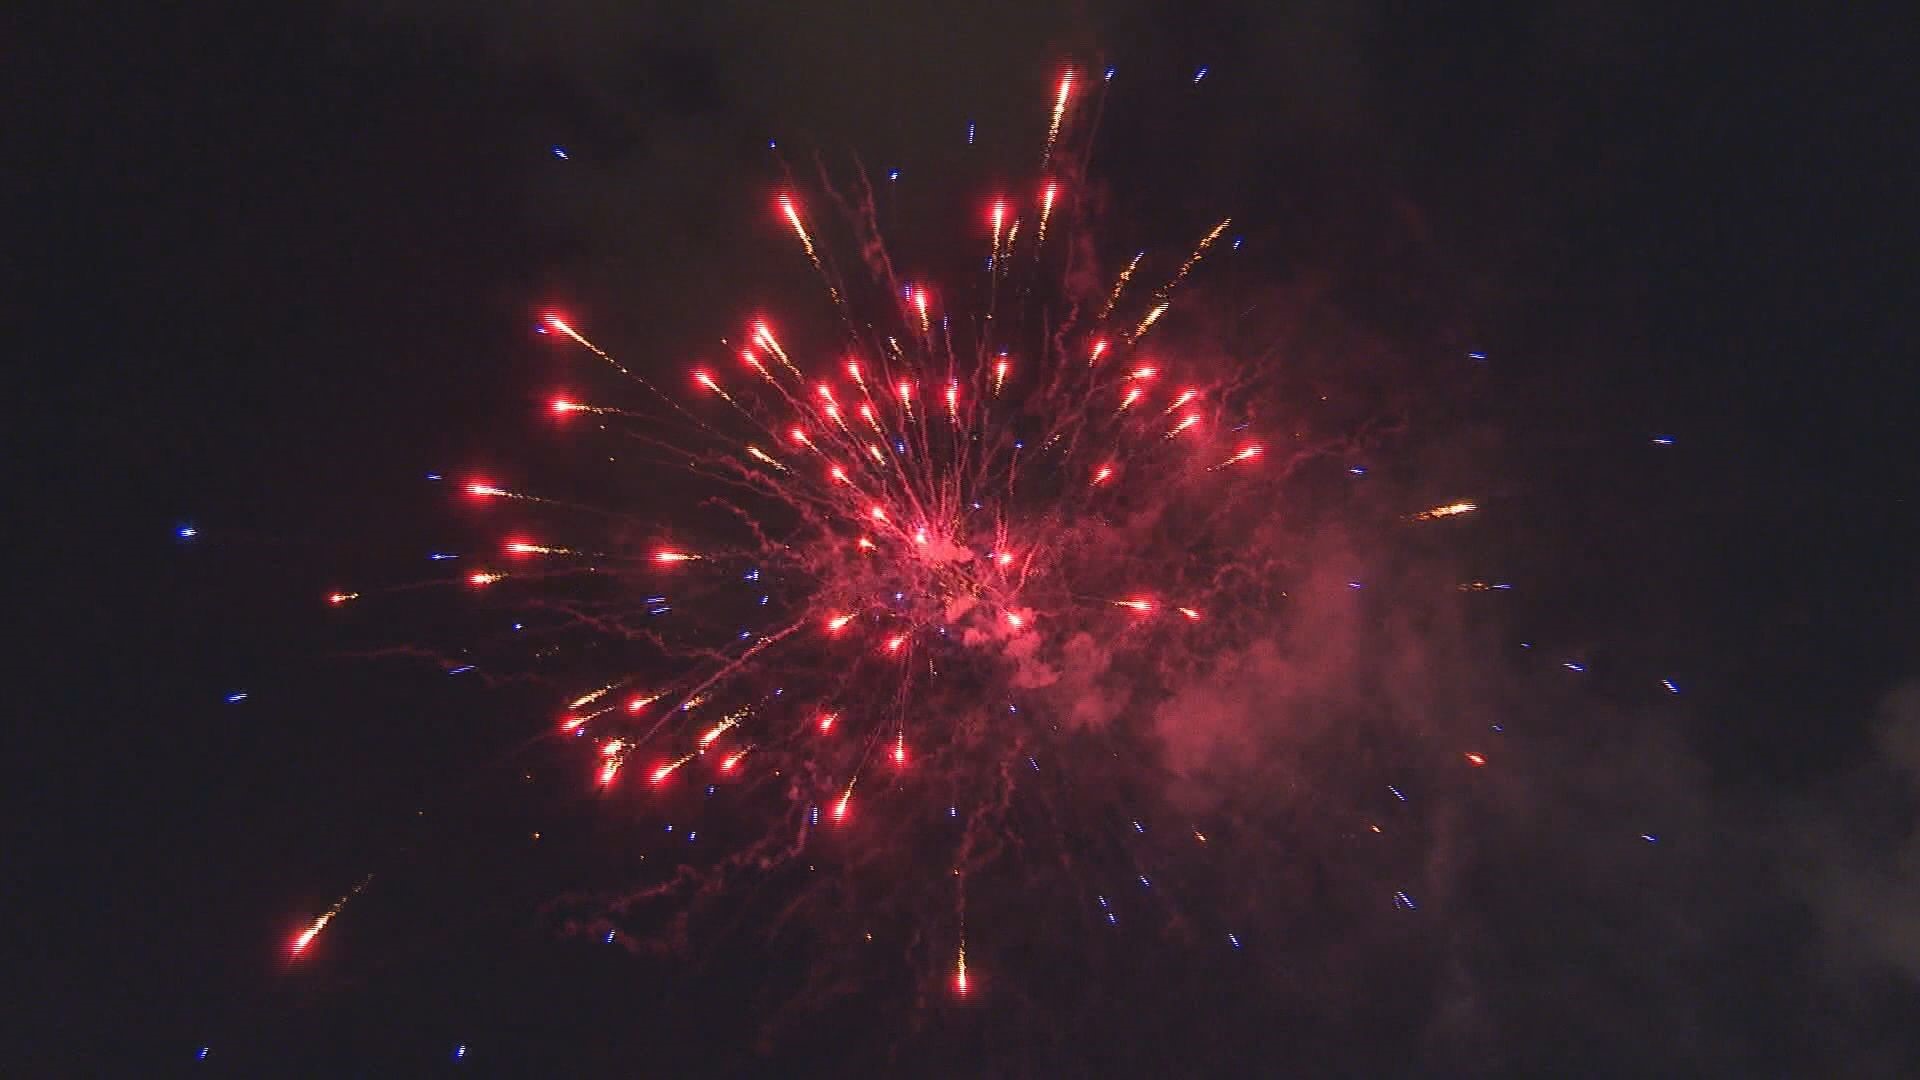 The big festivals, fun and fireworks are back!  Here are some Fourth of July celebrations happening in the Triad this weekend.